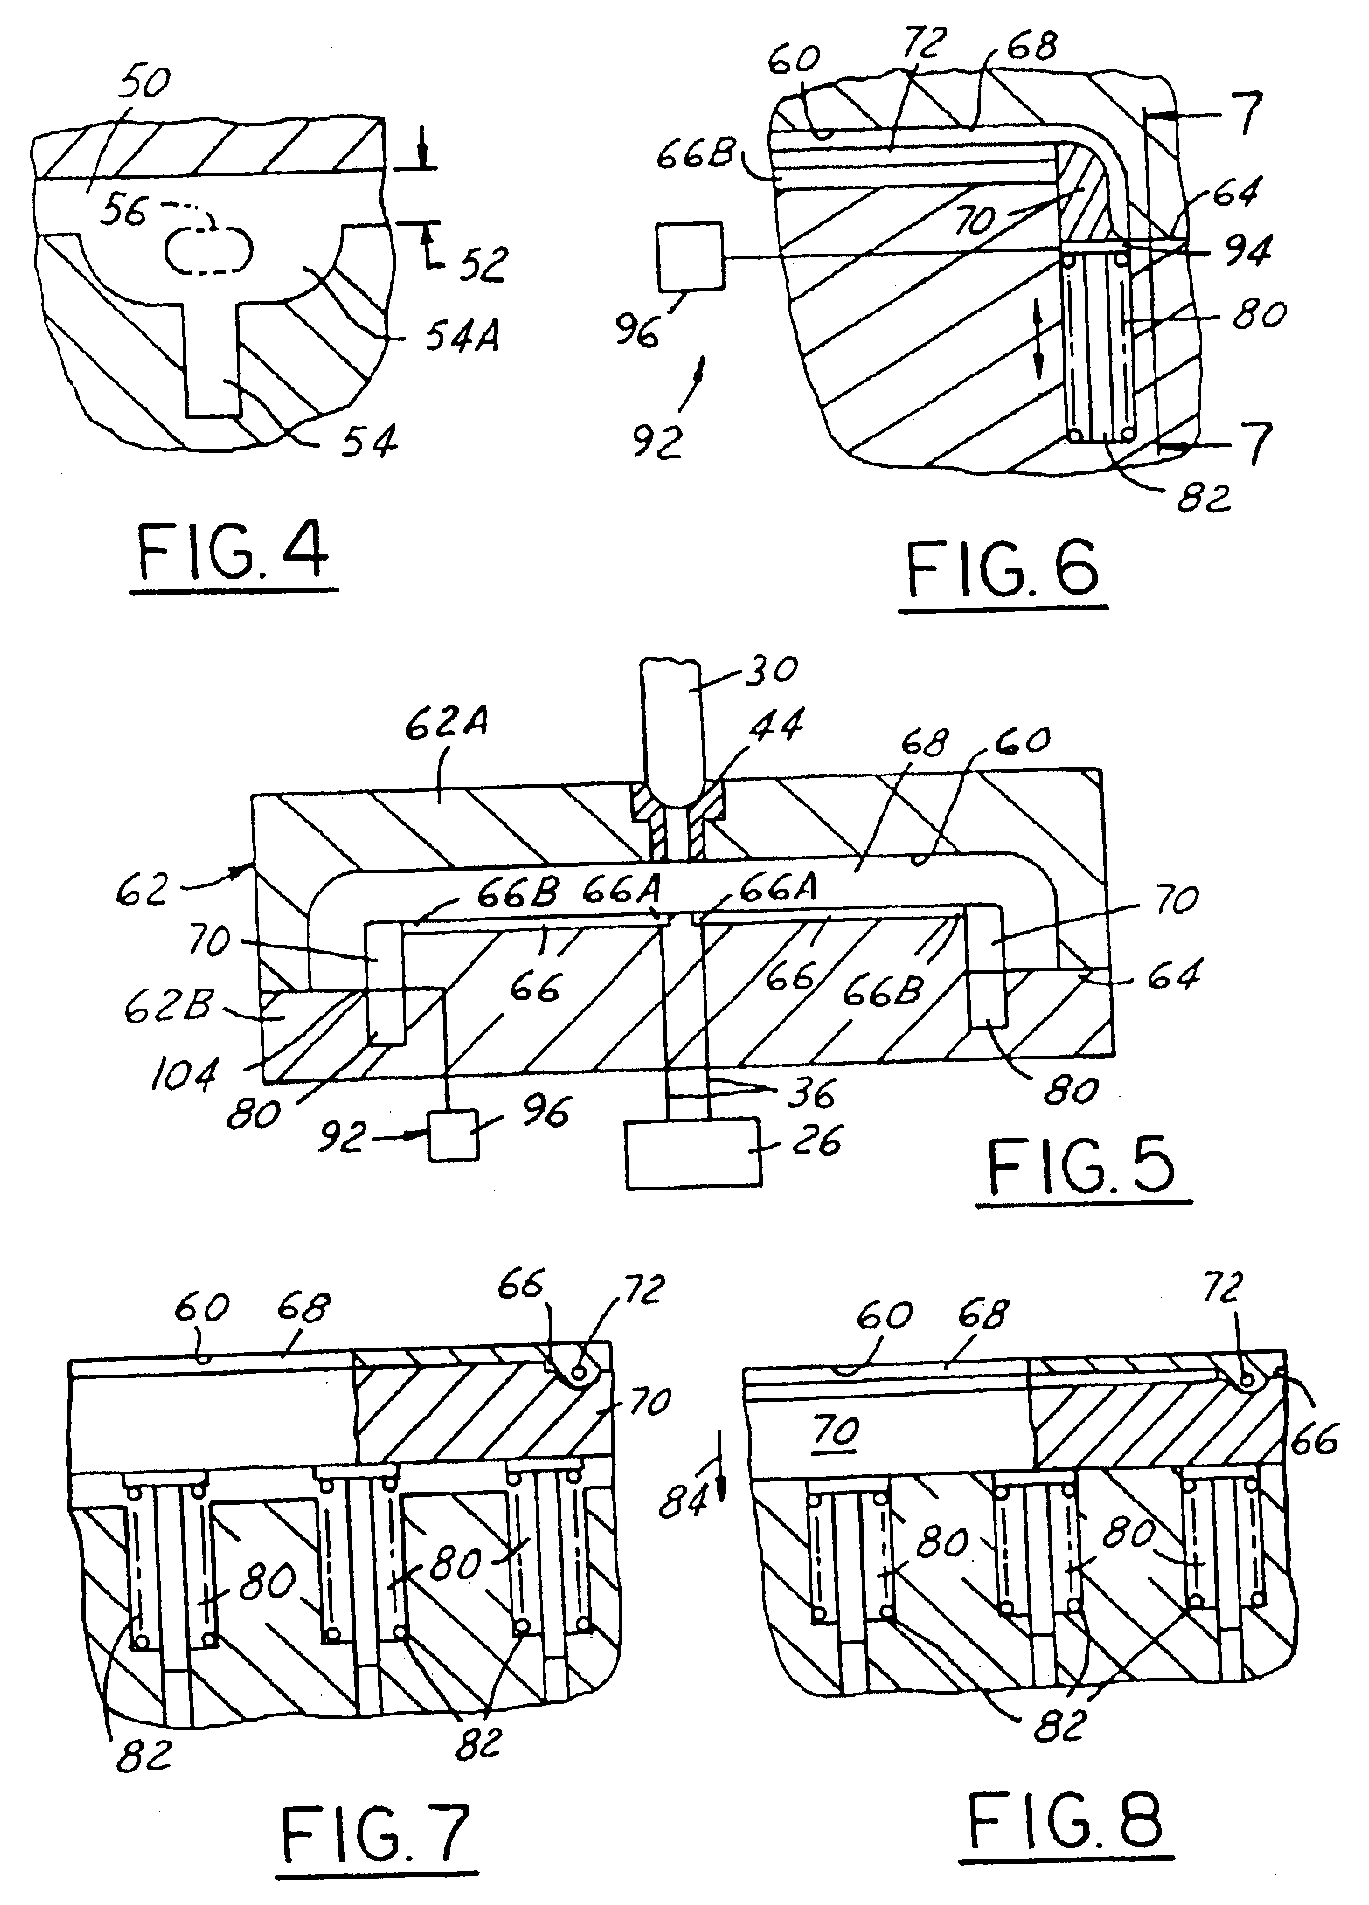 Plastic injection molding with moveable insert members